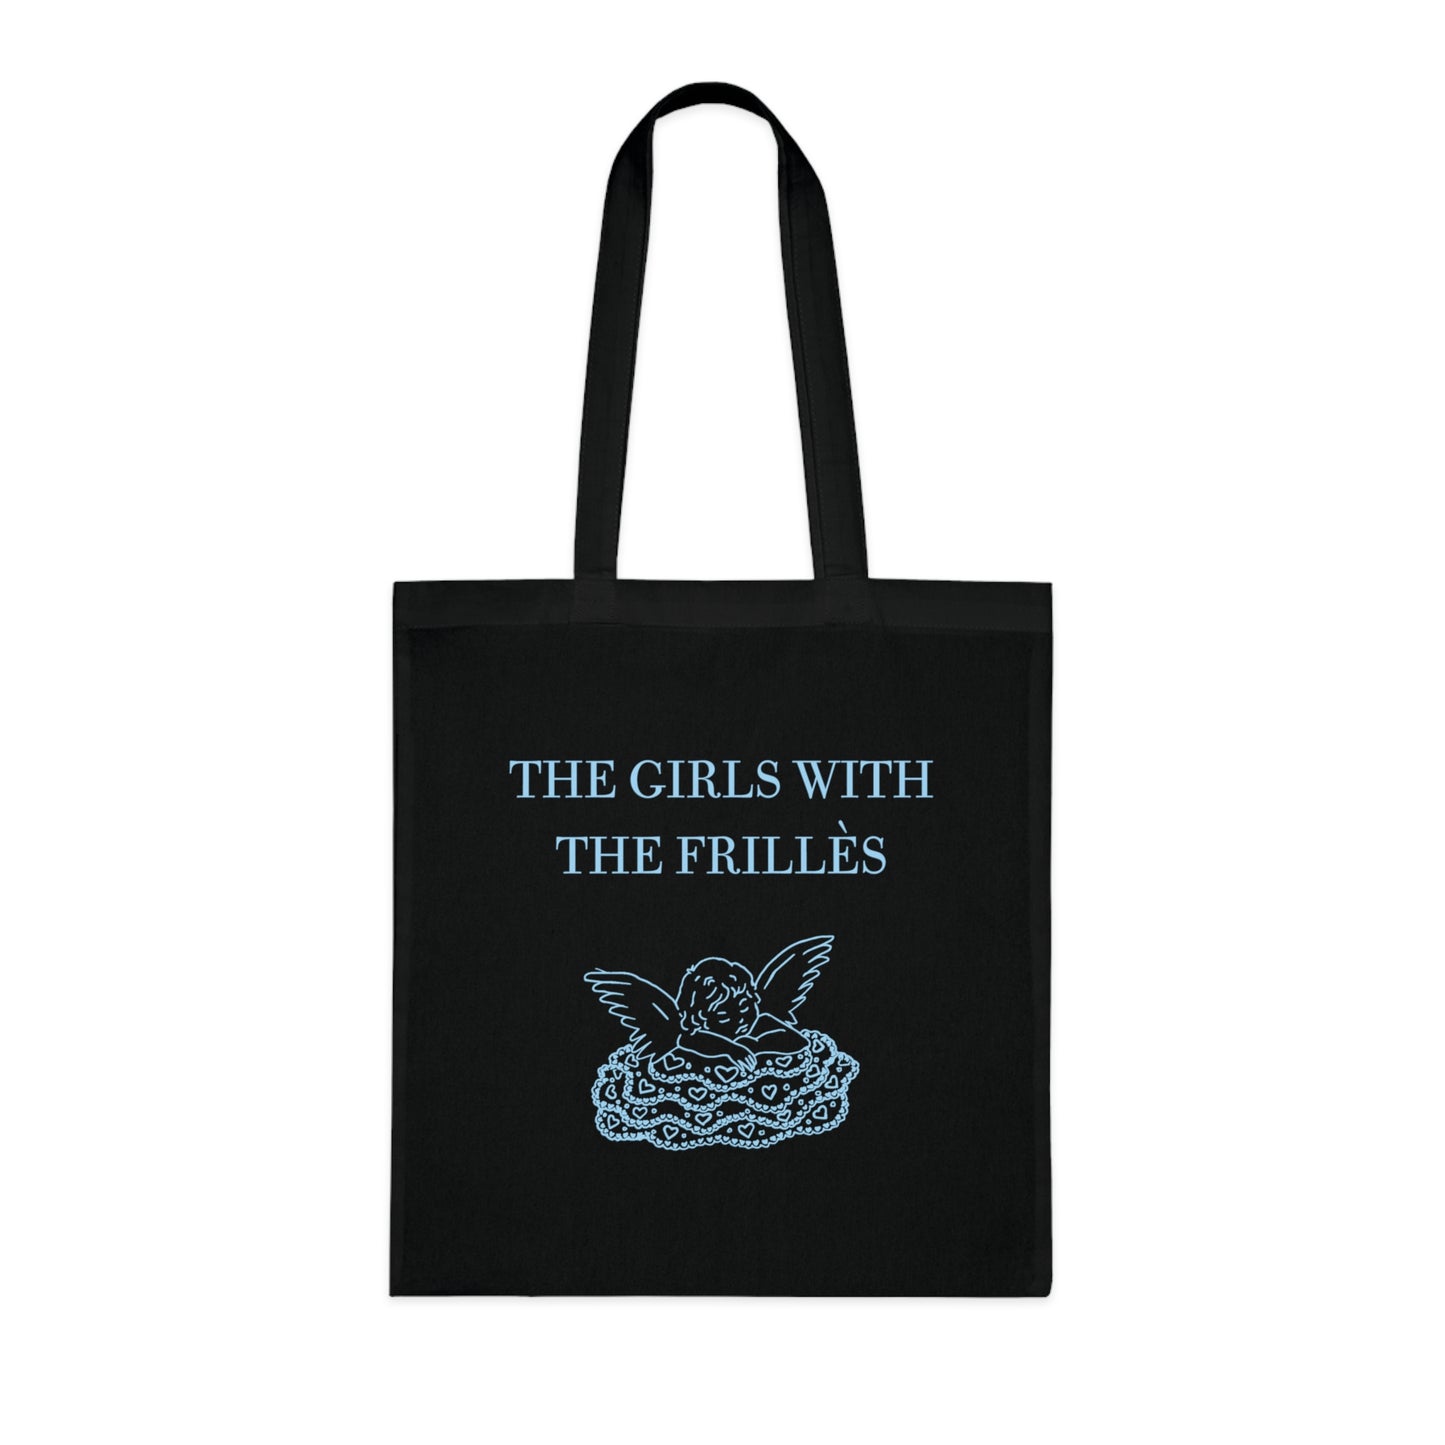 The girls with the Frillès cotton tote